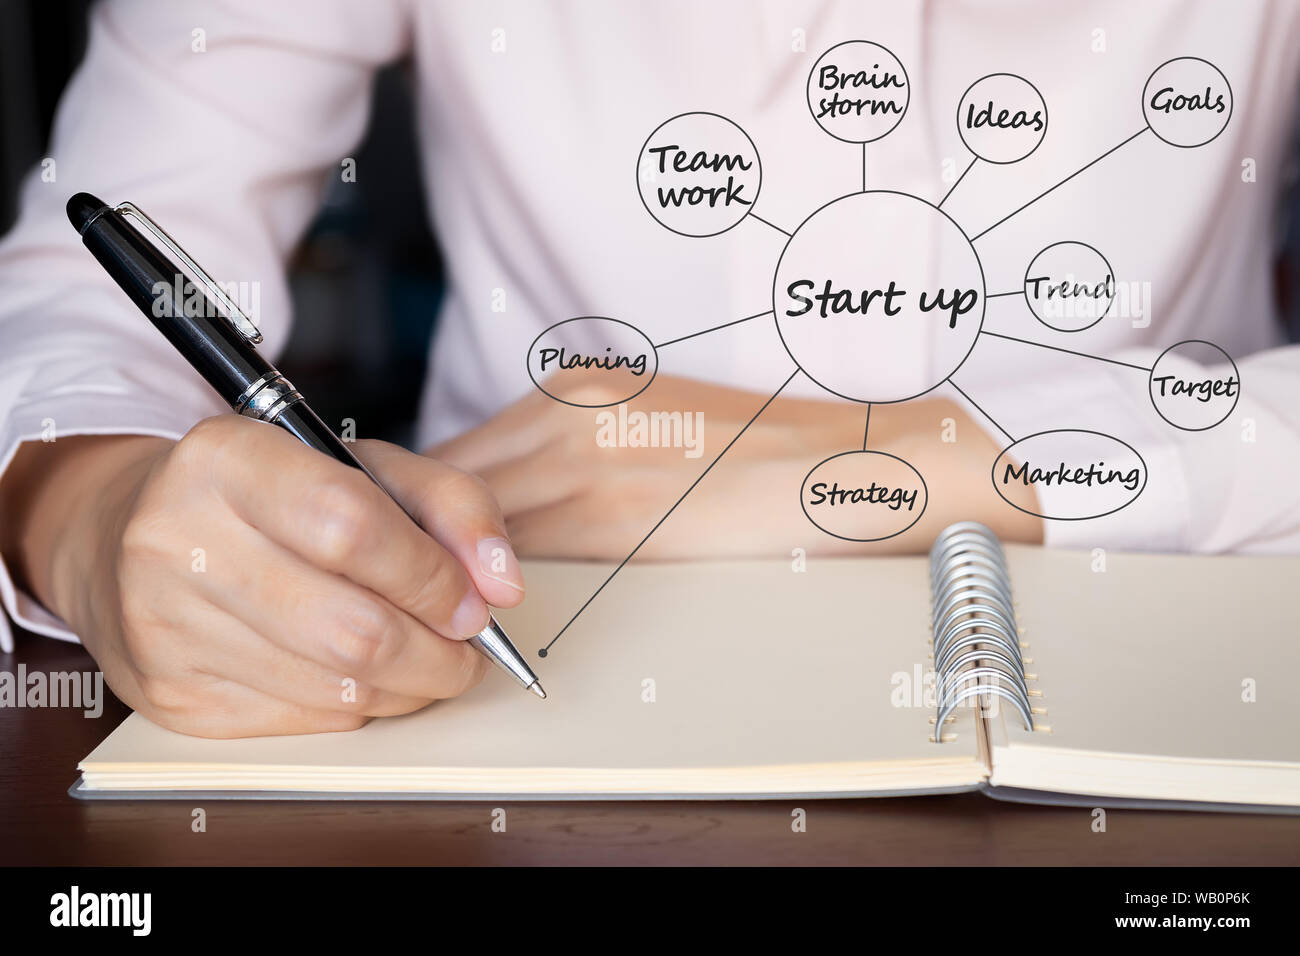 businessman sketch business plan idea for start up business on notebook. business plan management mind map, strategy concept Stock Photo